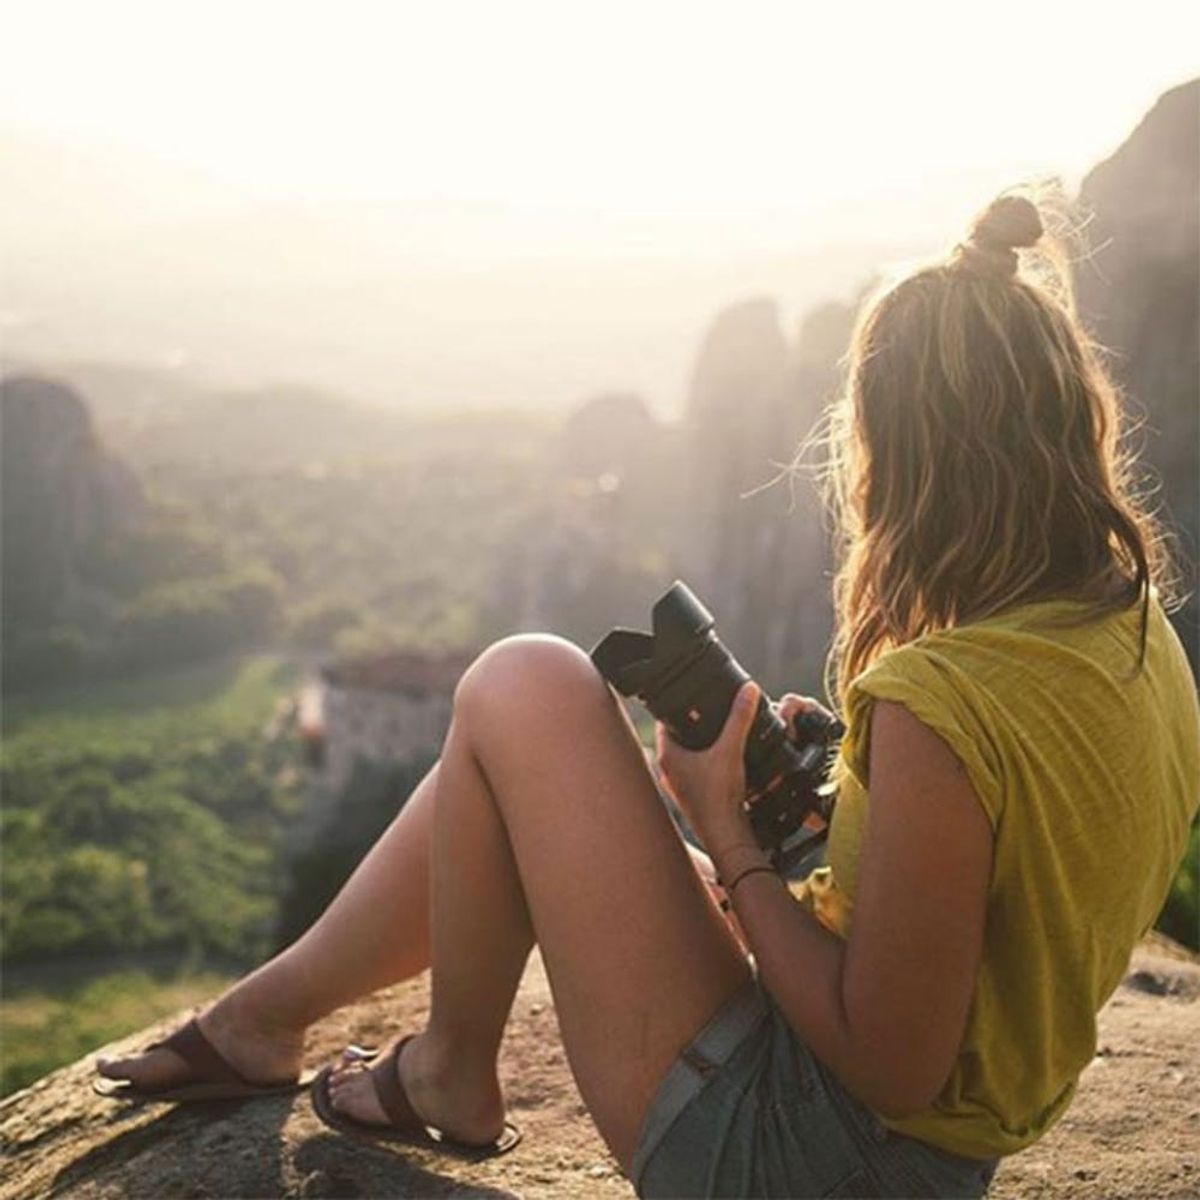 How This Travel Photographer Combined Her Different Passions into One Incredible Career